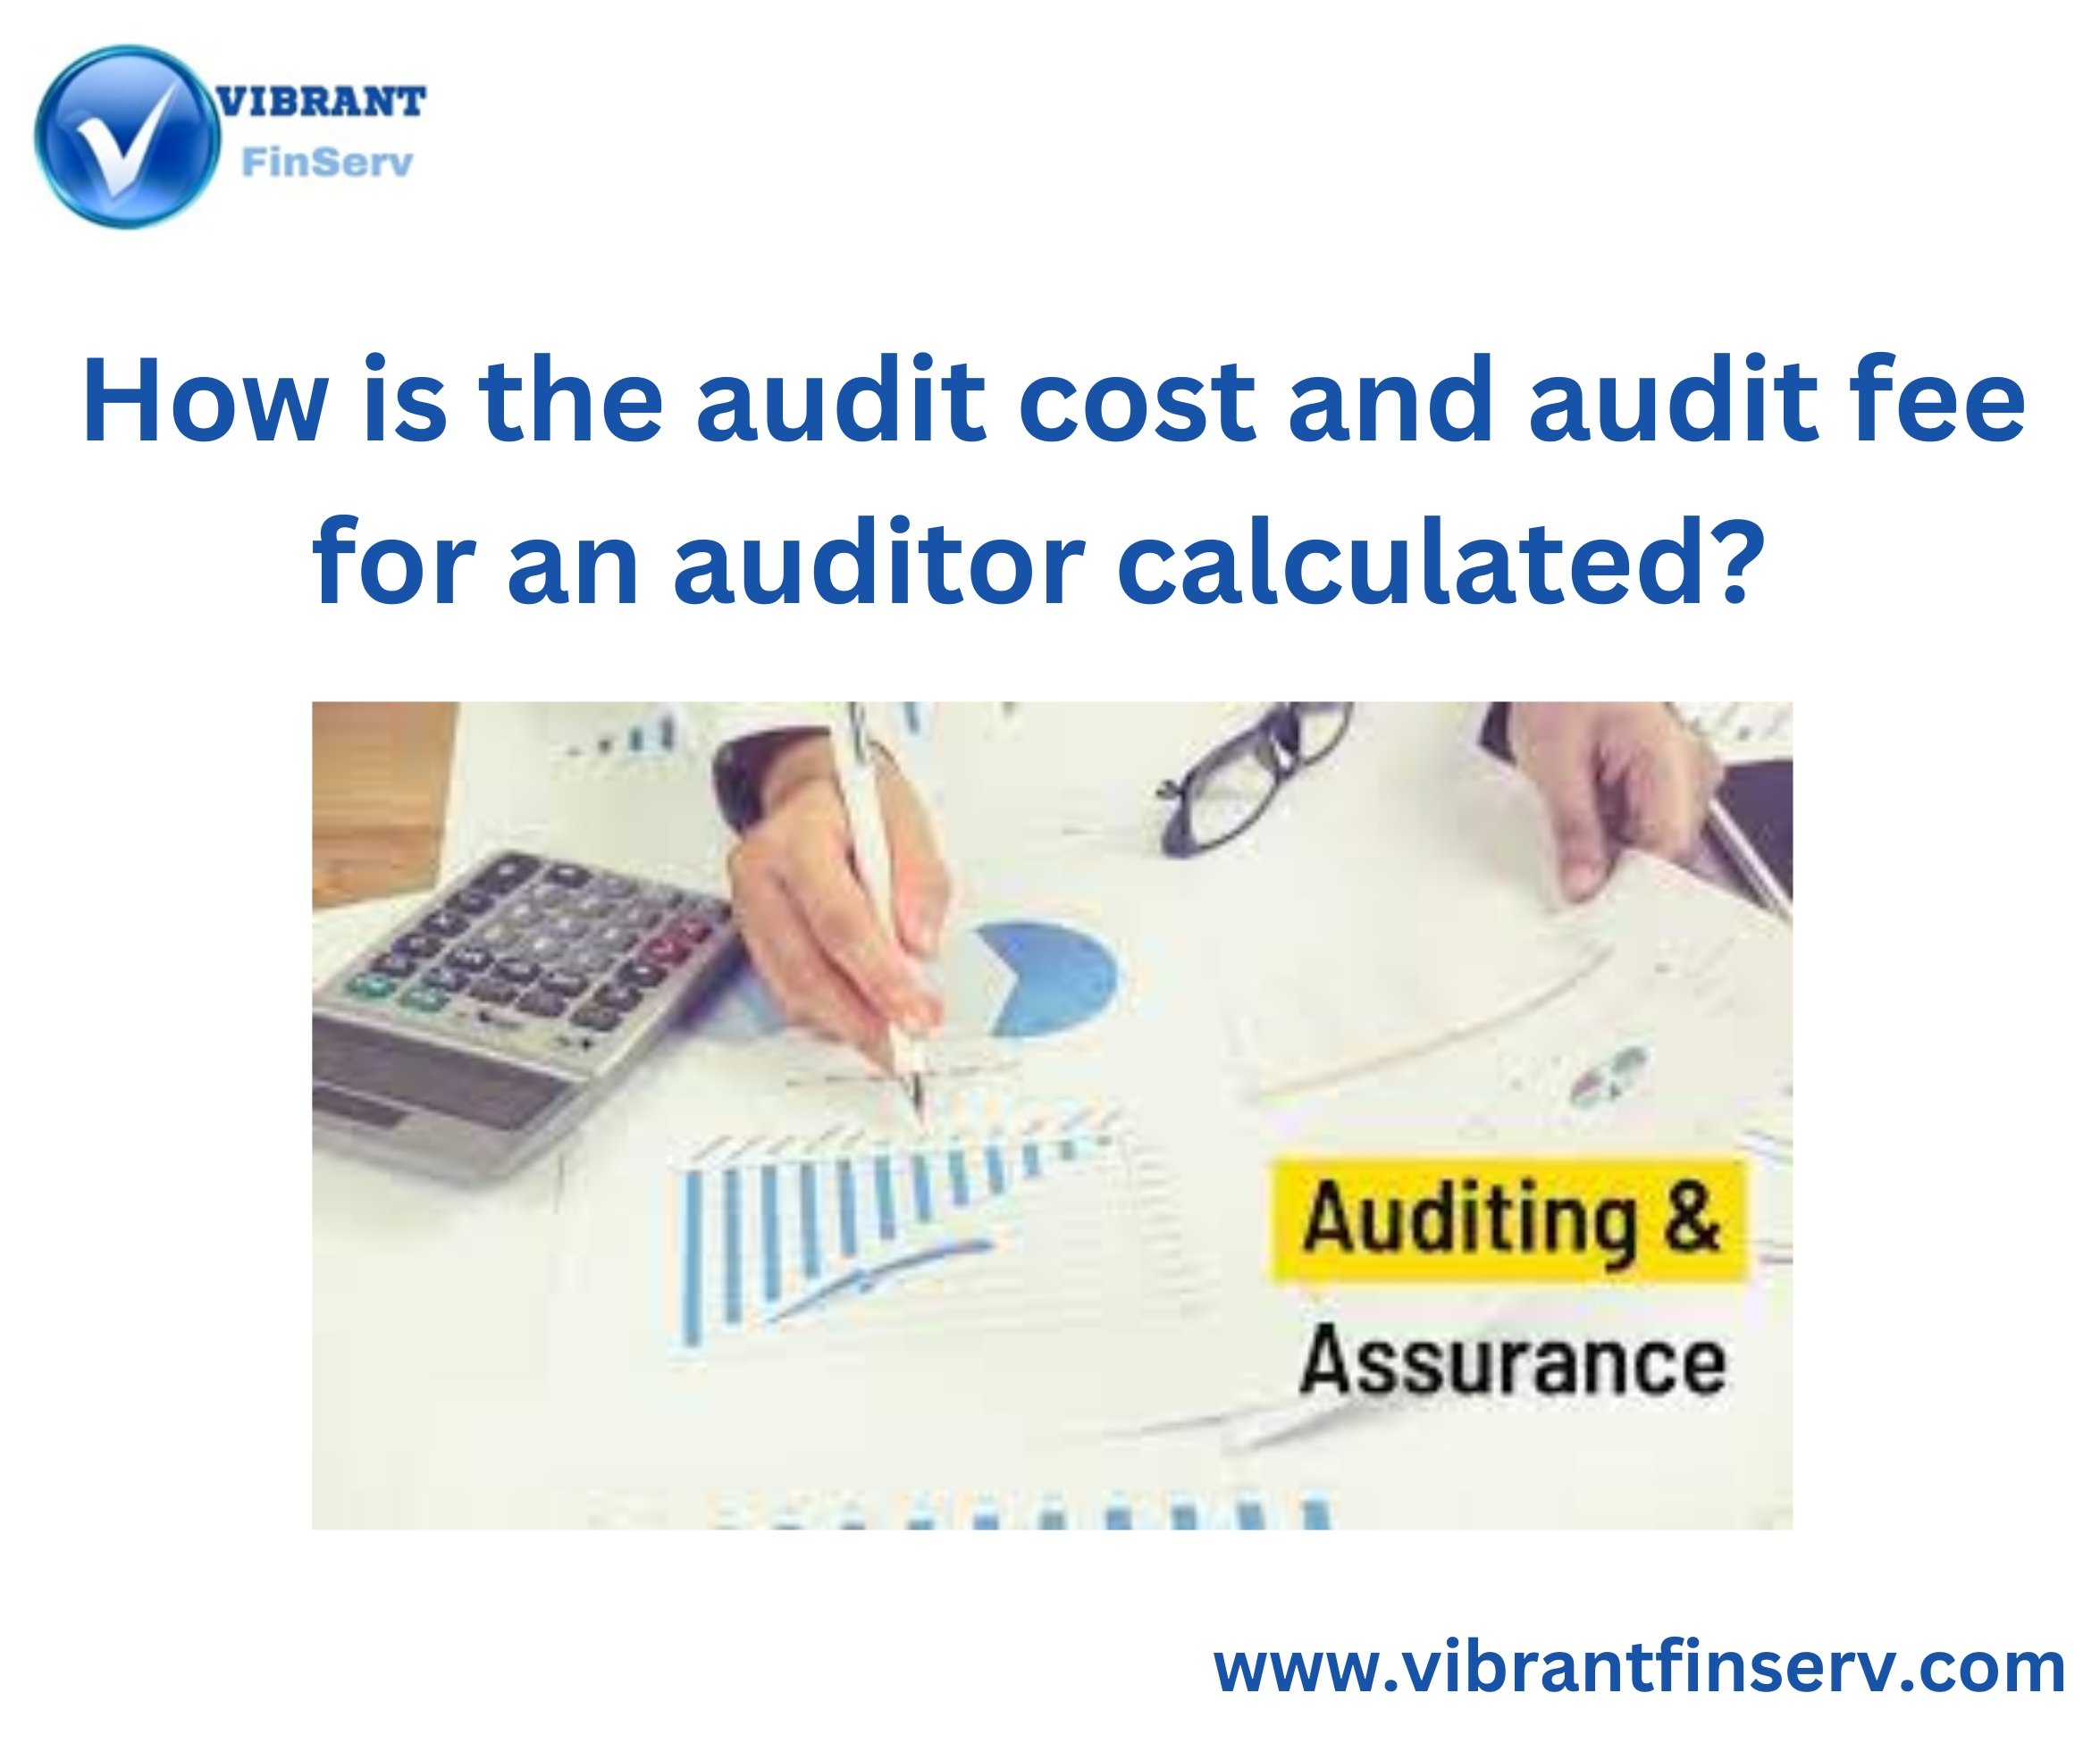 The Audit Cost and Audit Fee